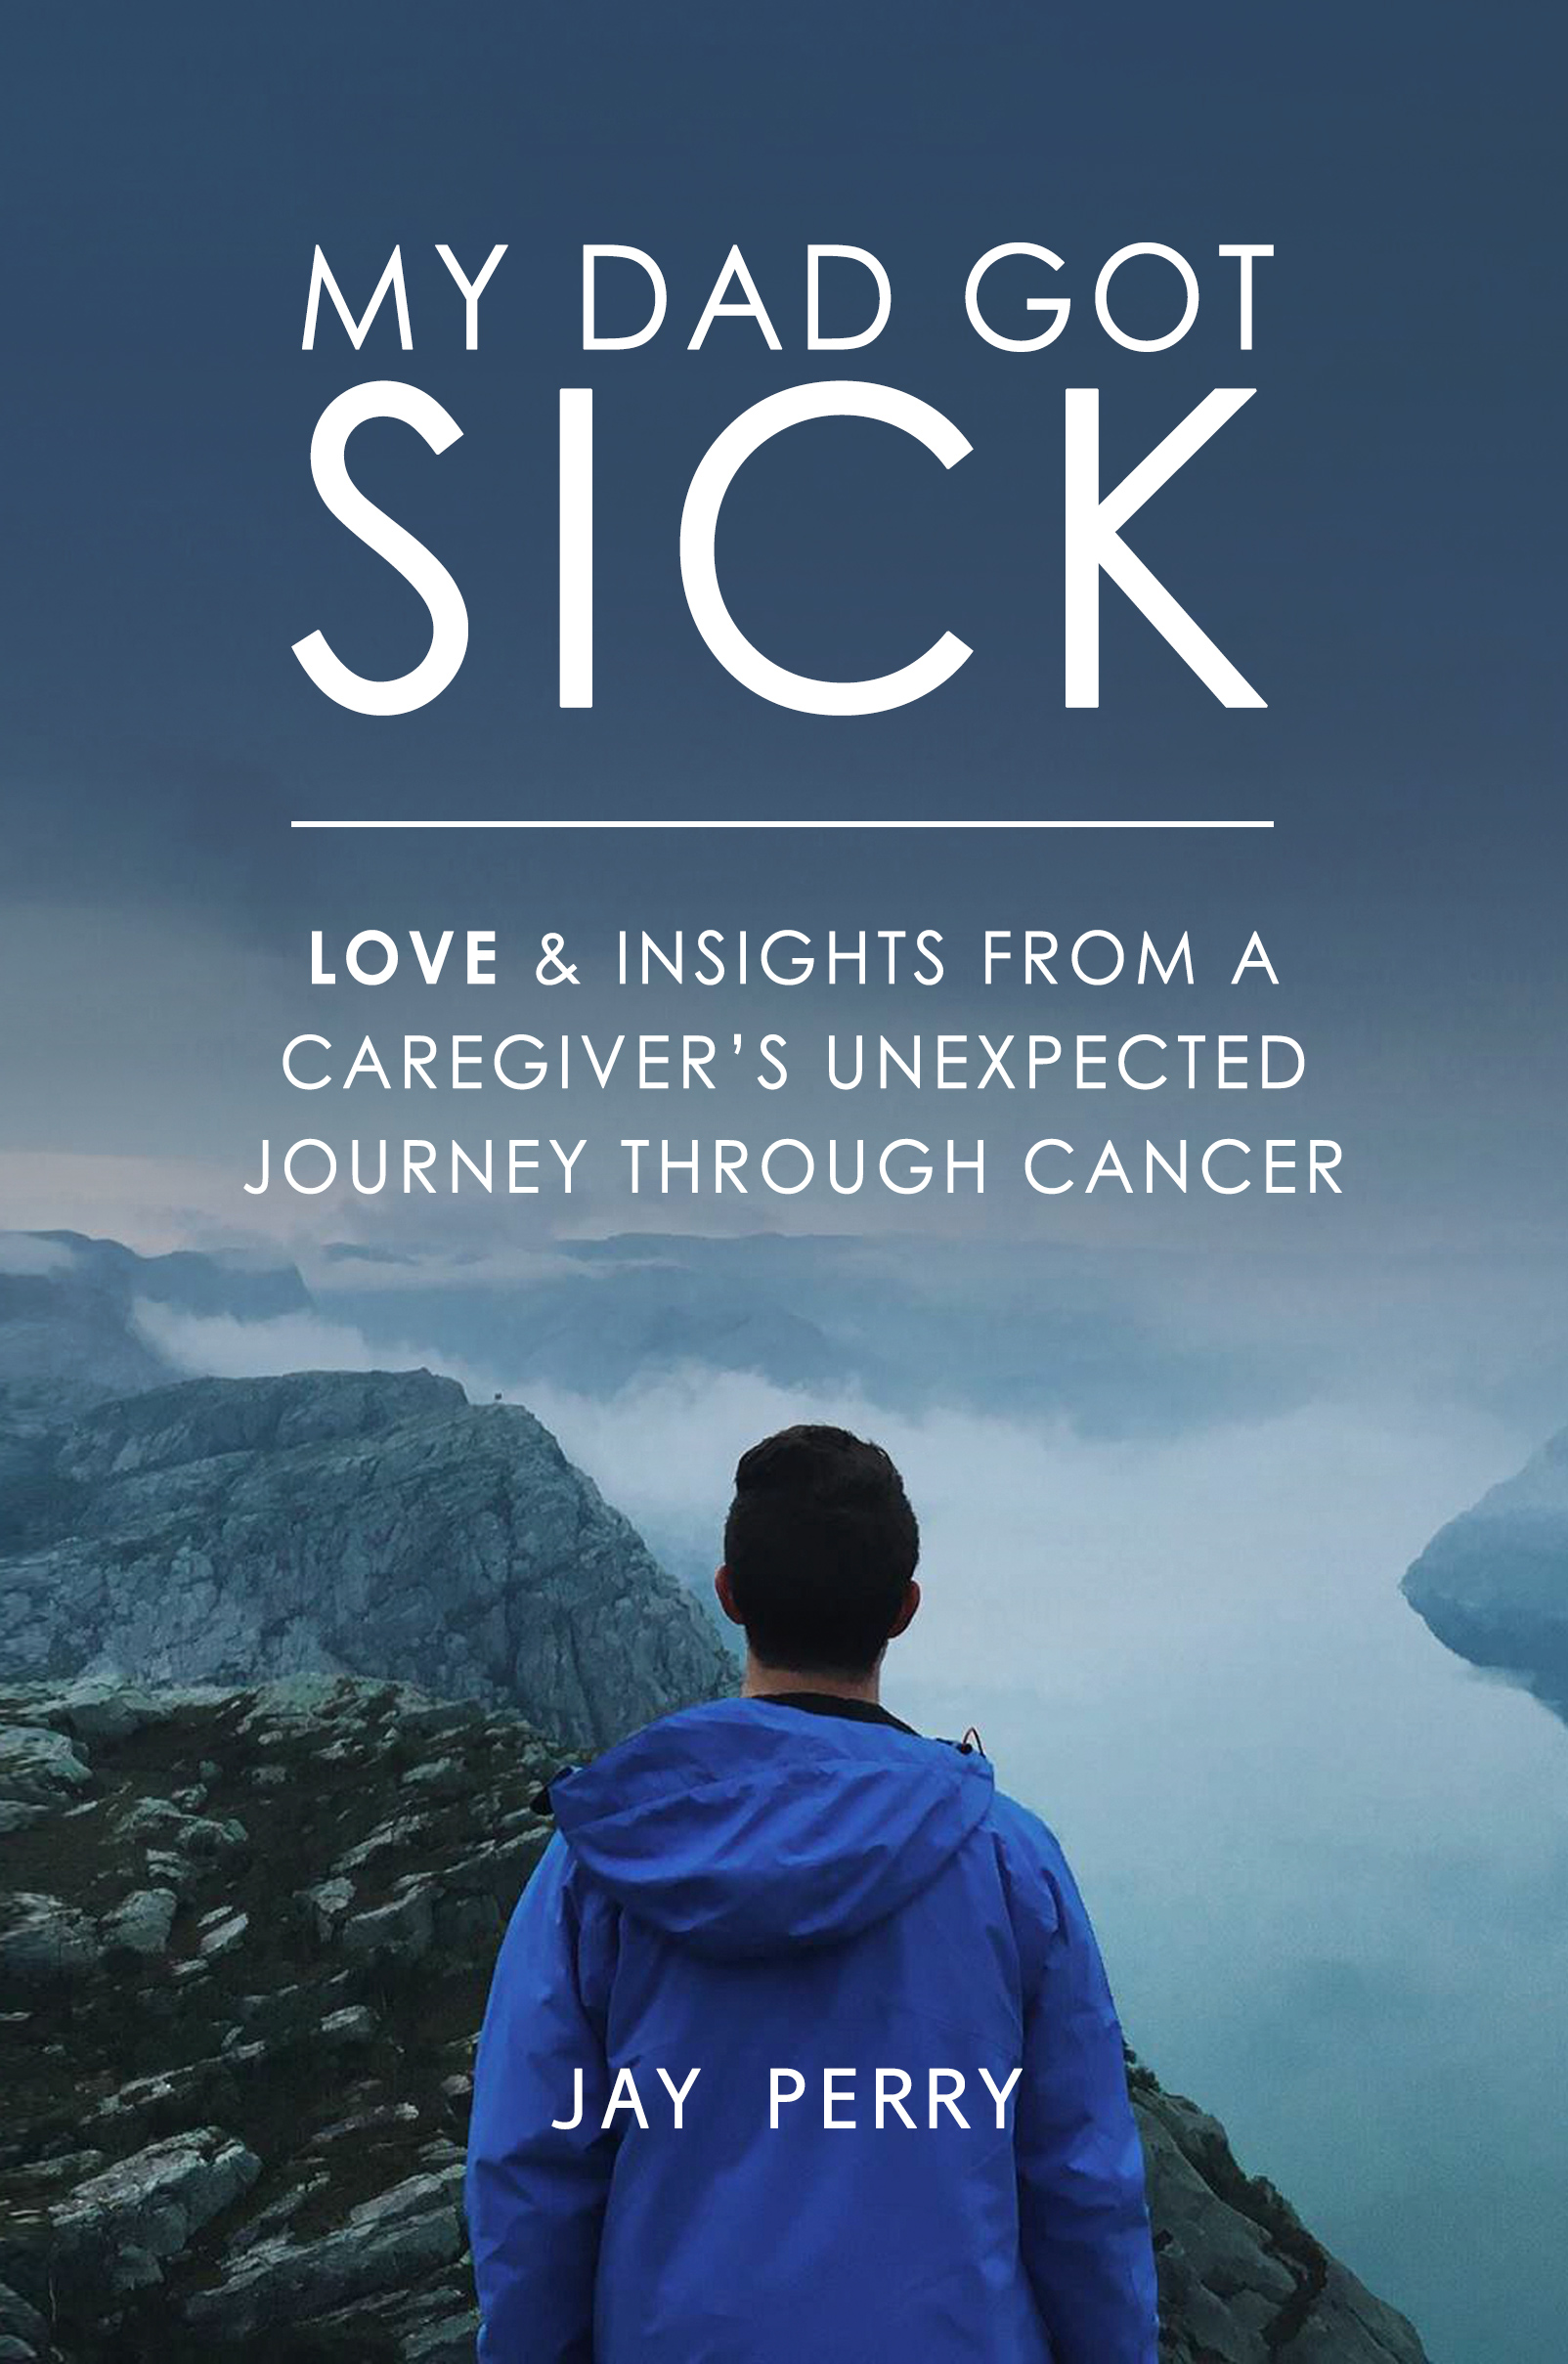 My Dad Got Sick: Love and Insights From a Caregiver's Unexpected Journey Through Cancer